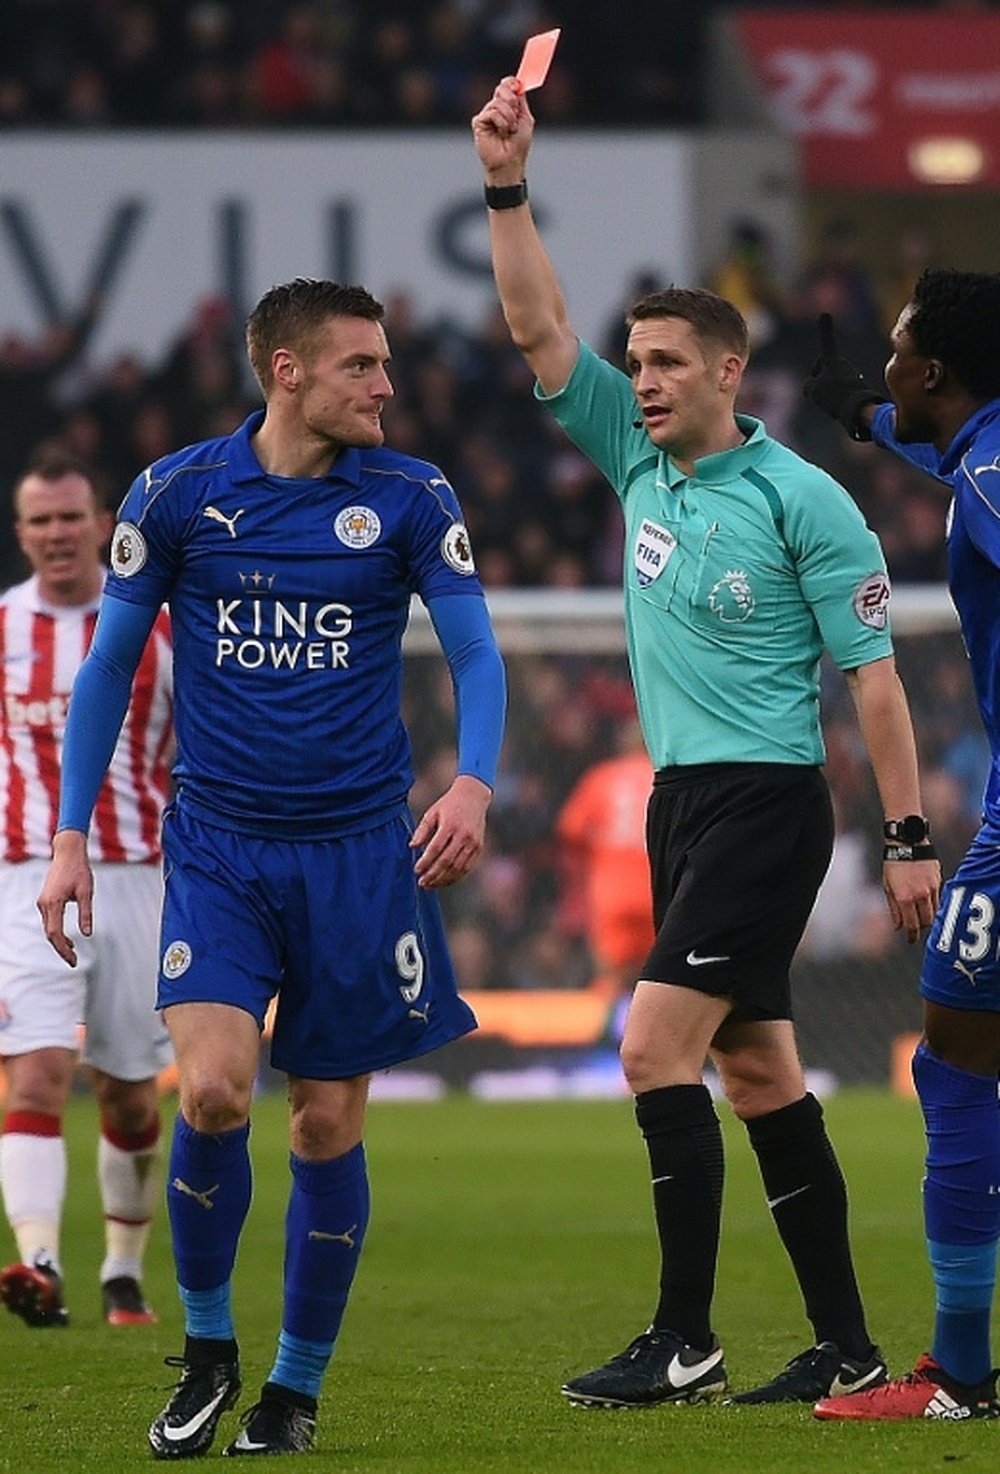 Vardy's last appearance came against Stoke, a game in which he was sent off. AFP